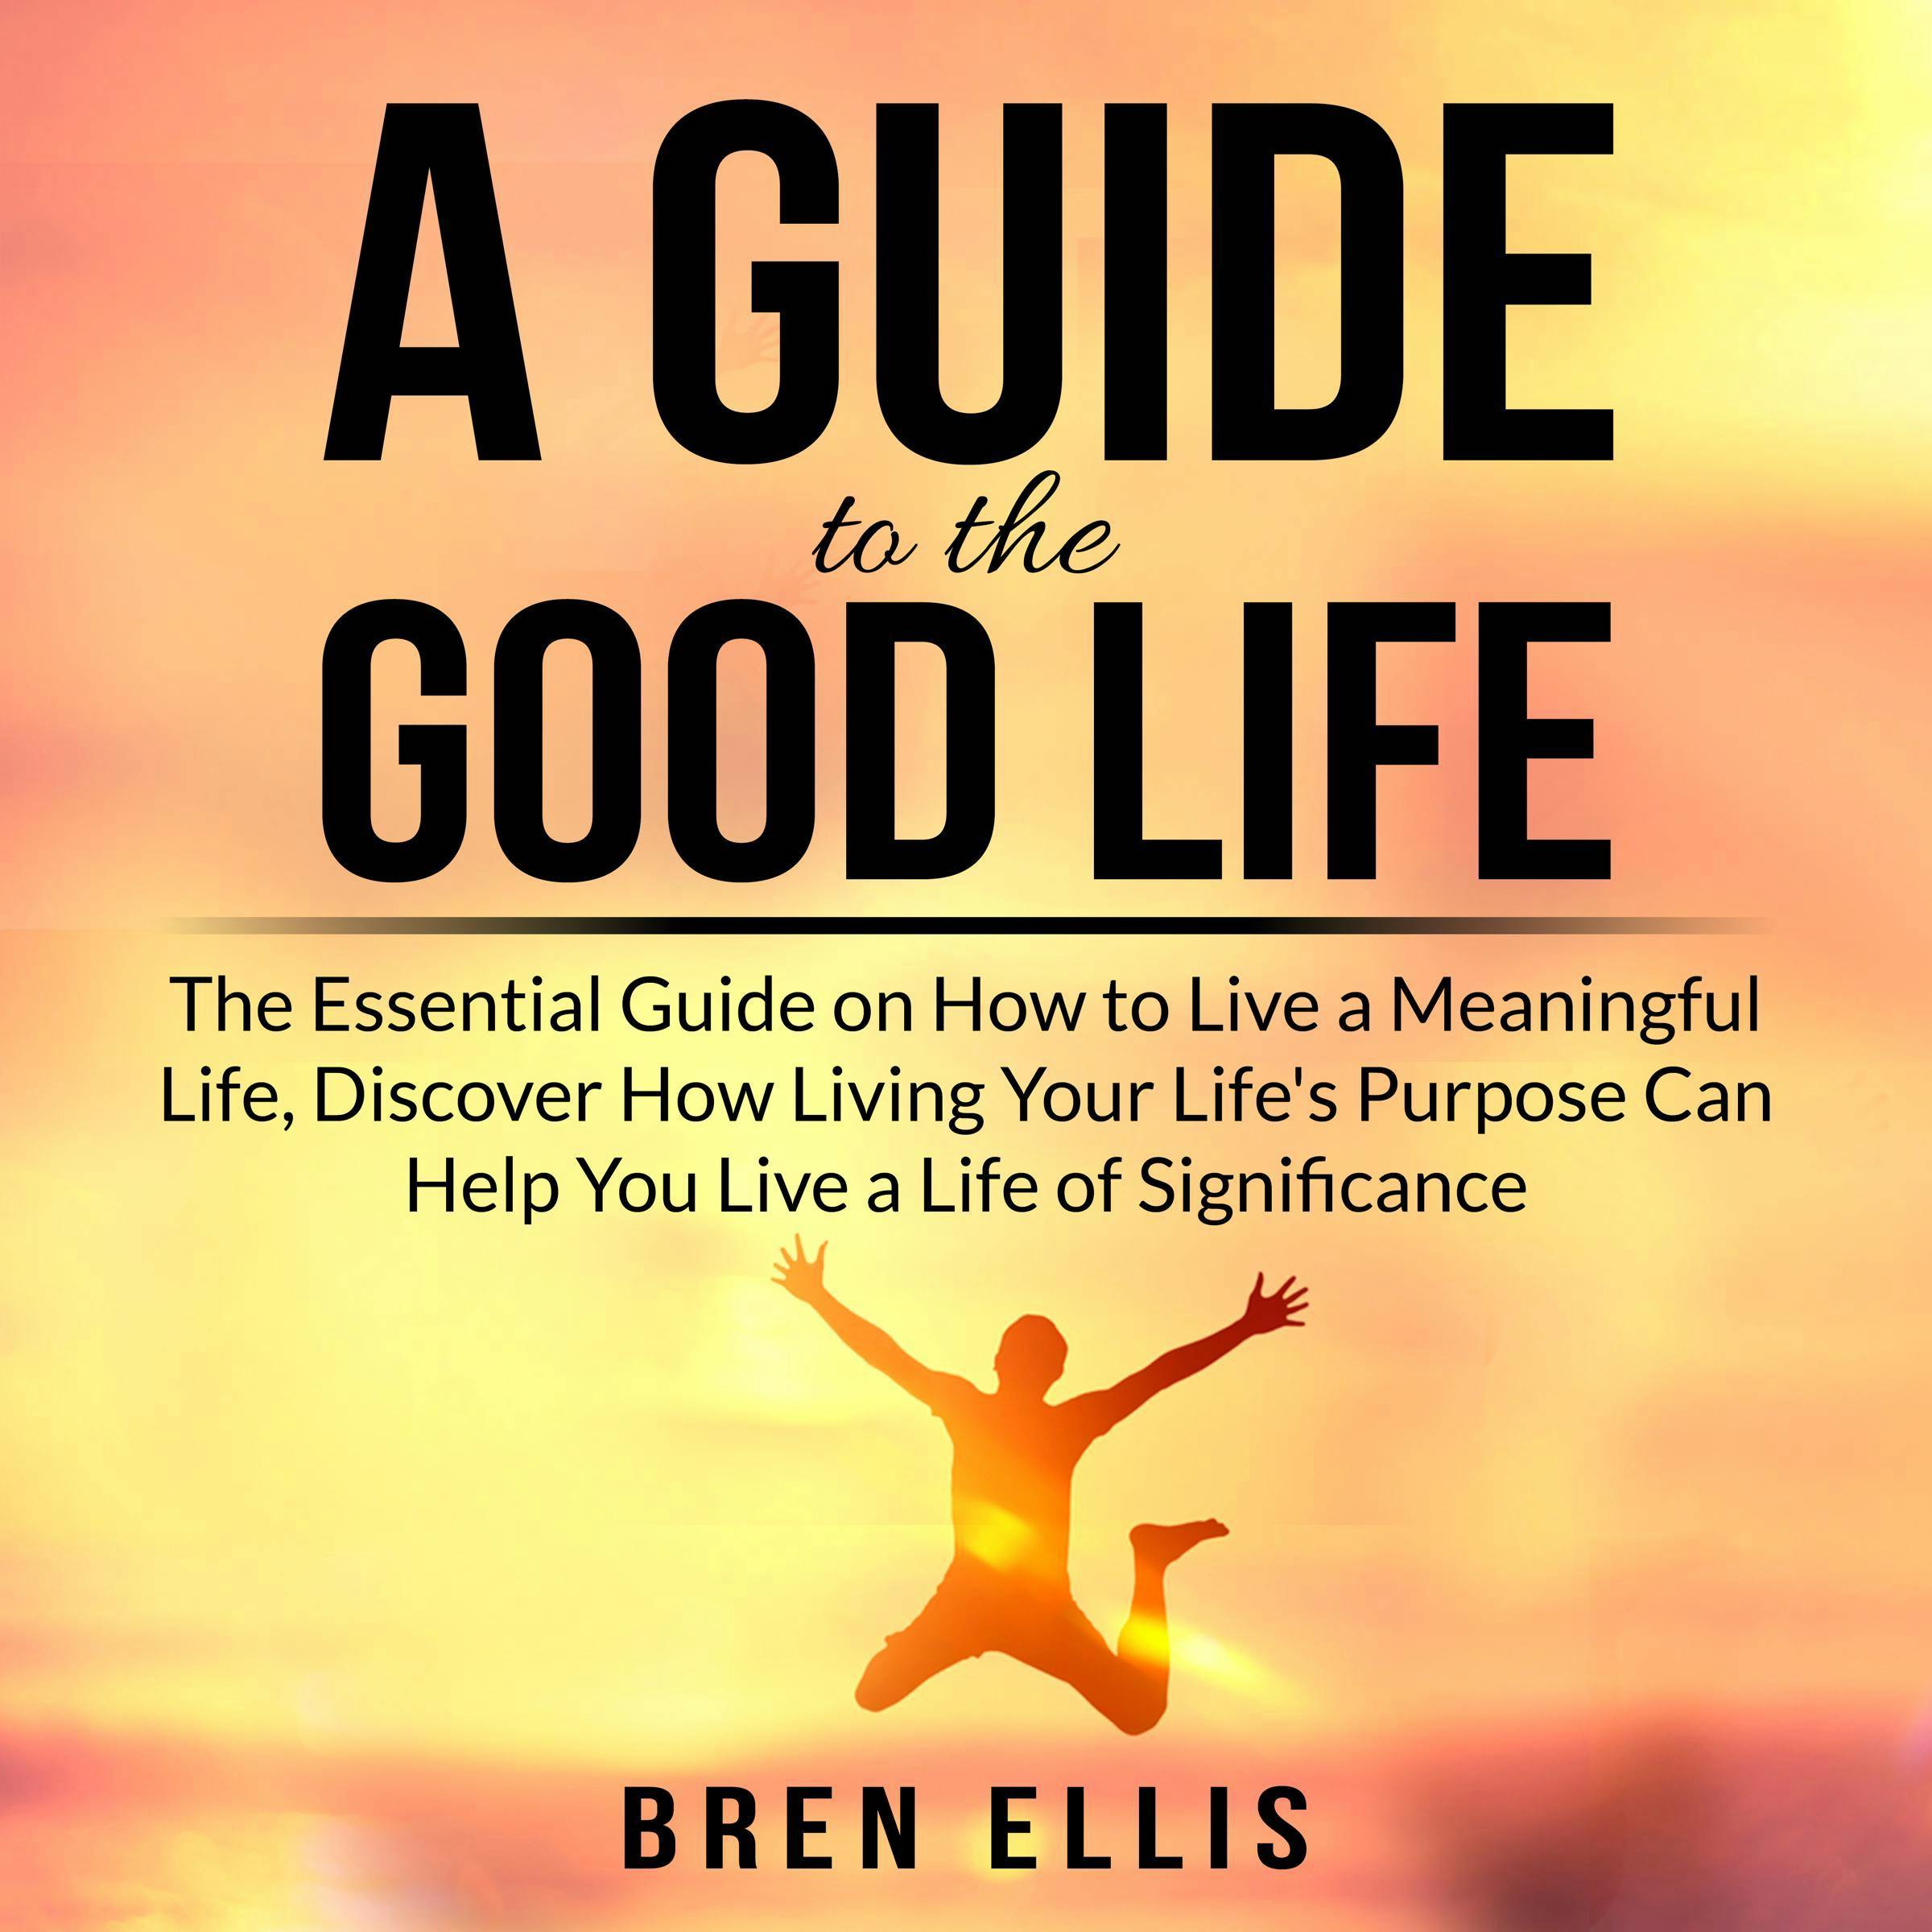 A Guide to the Good Life: The Essential Guide on How to Live a Meaningful Life, Discover How Living Your Life's Purpose Can Help You Live a Life of Significance - Bren Ellis